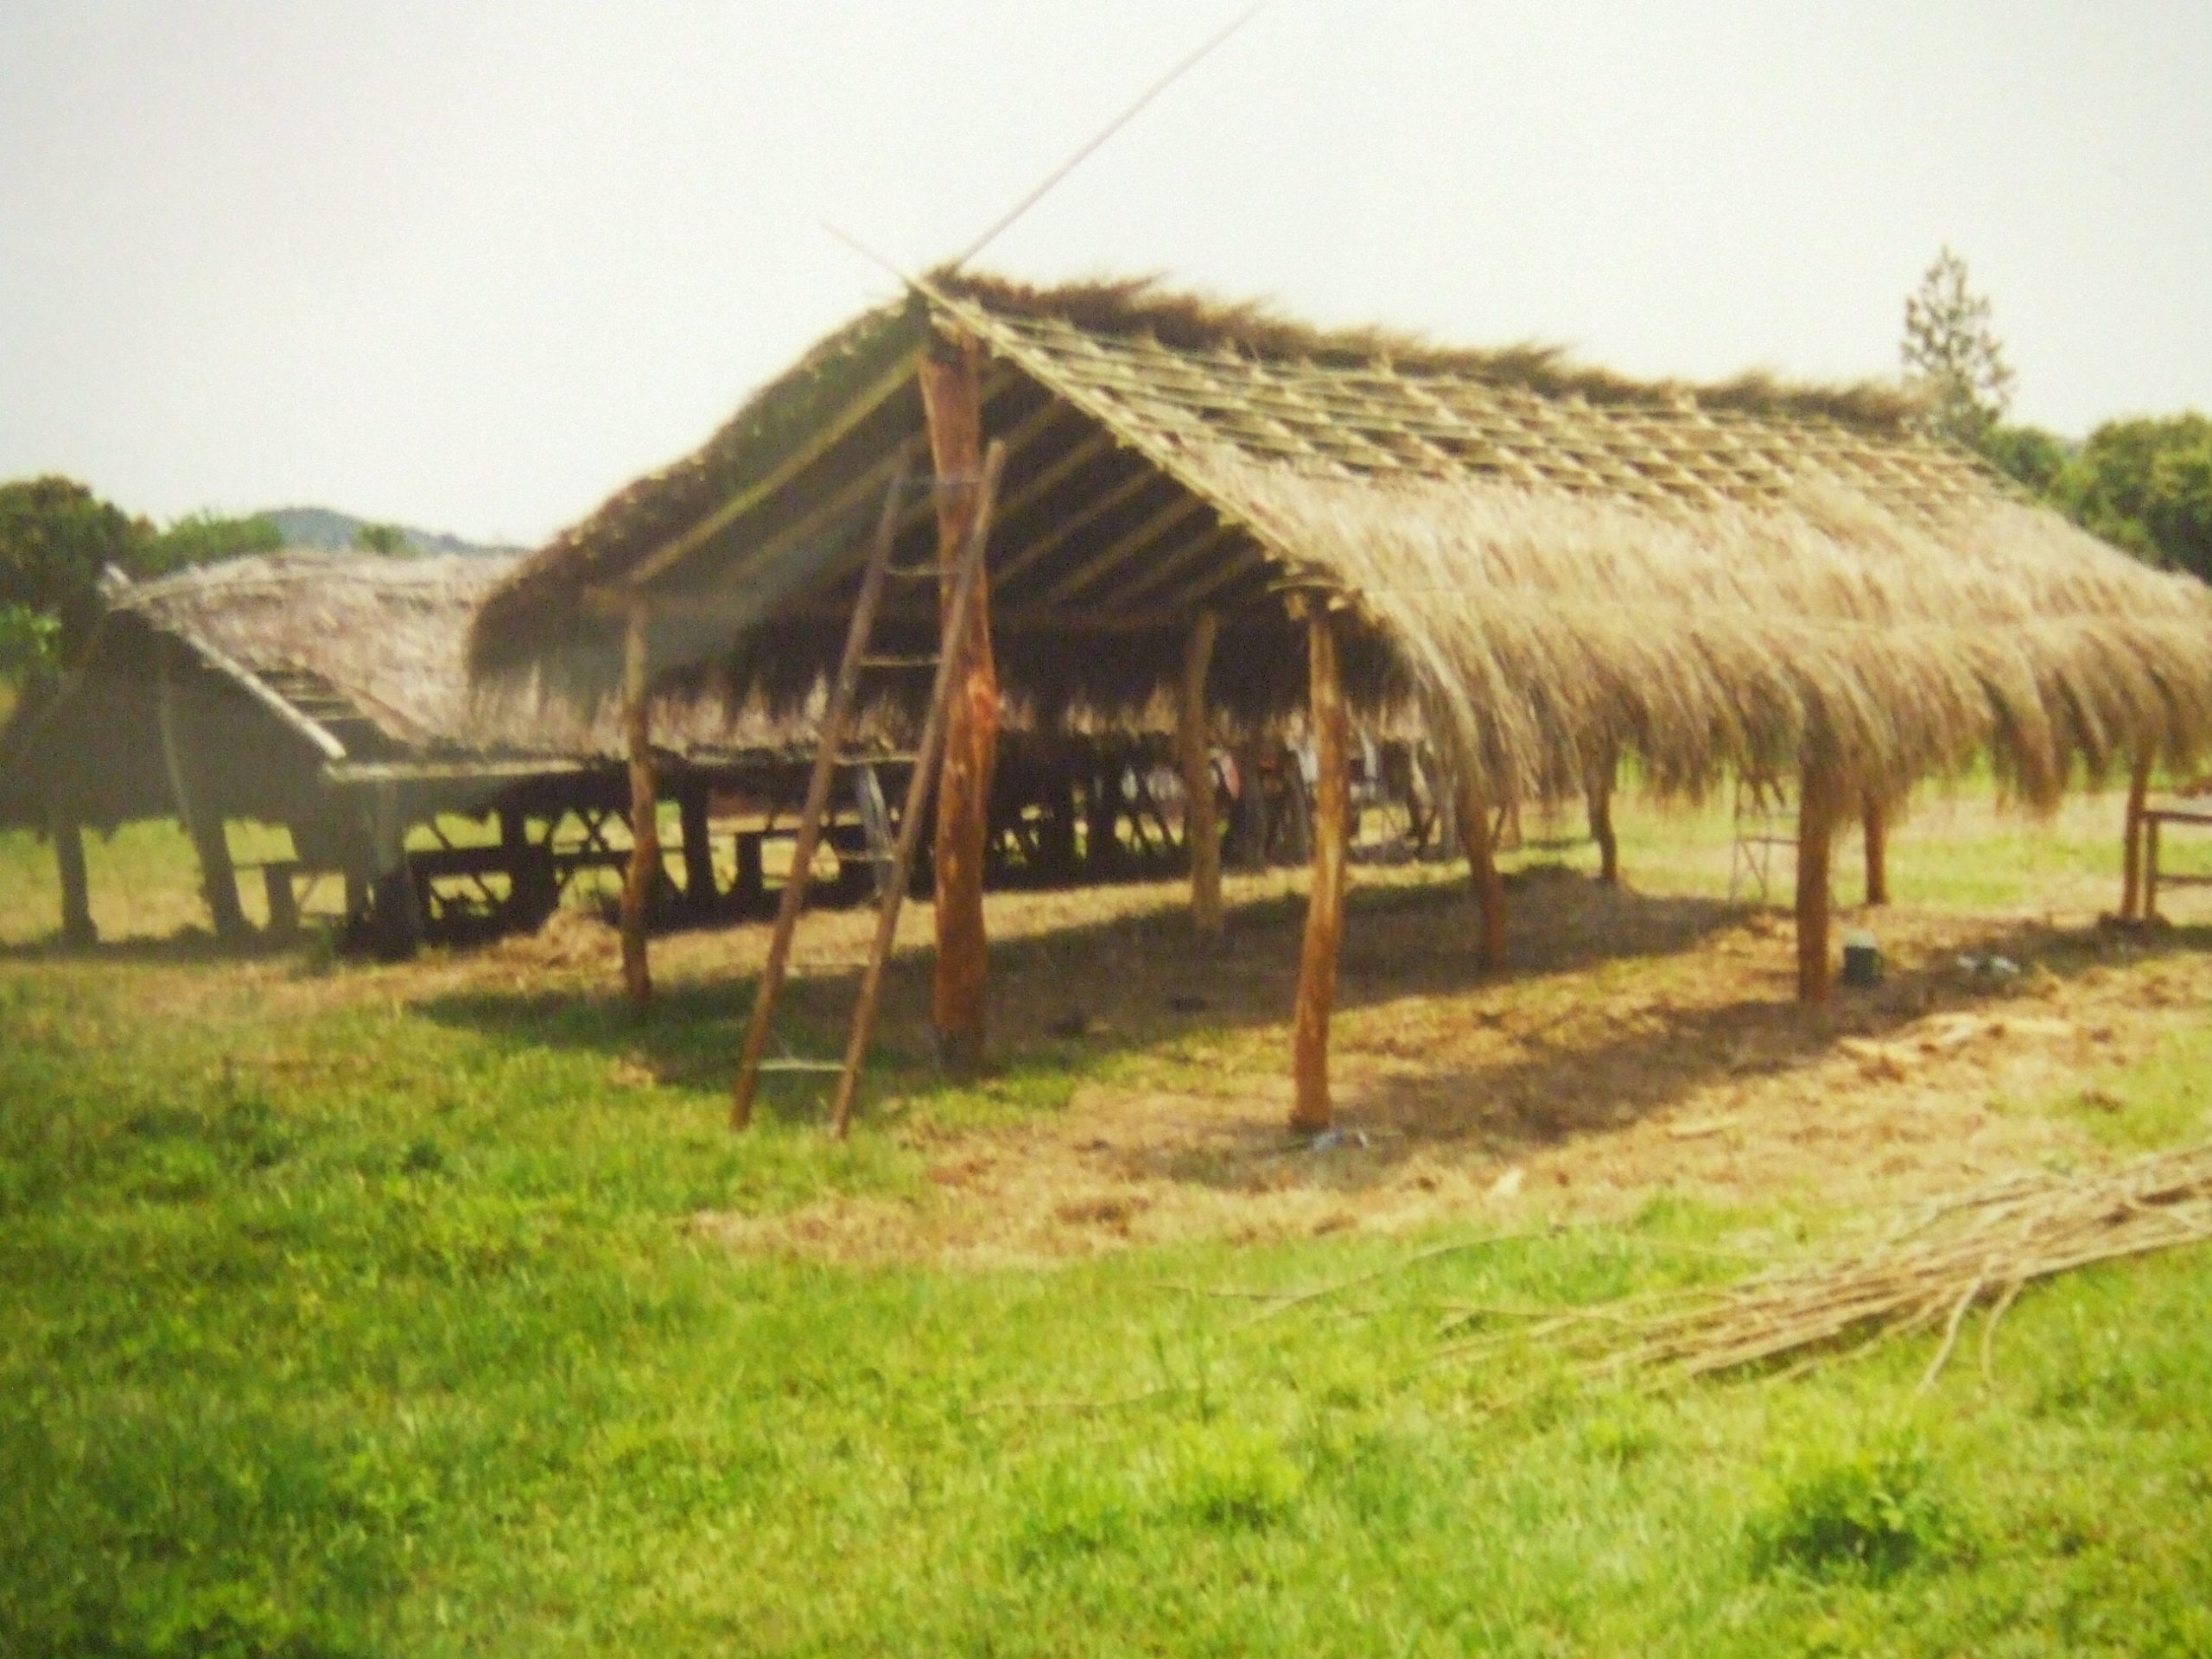 To teach in Paraguay a school house had to be built